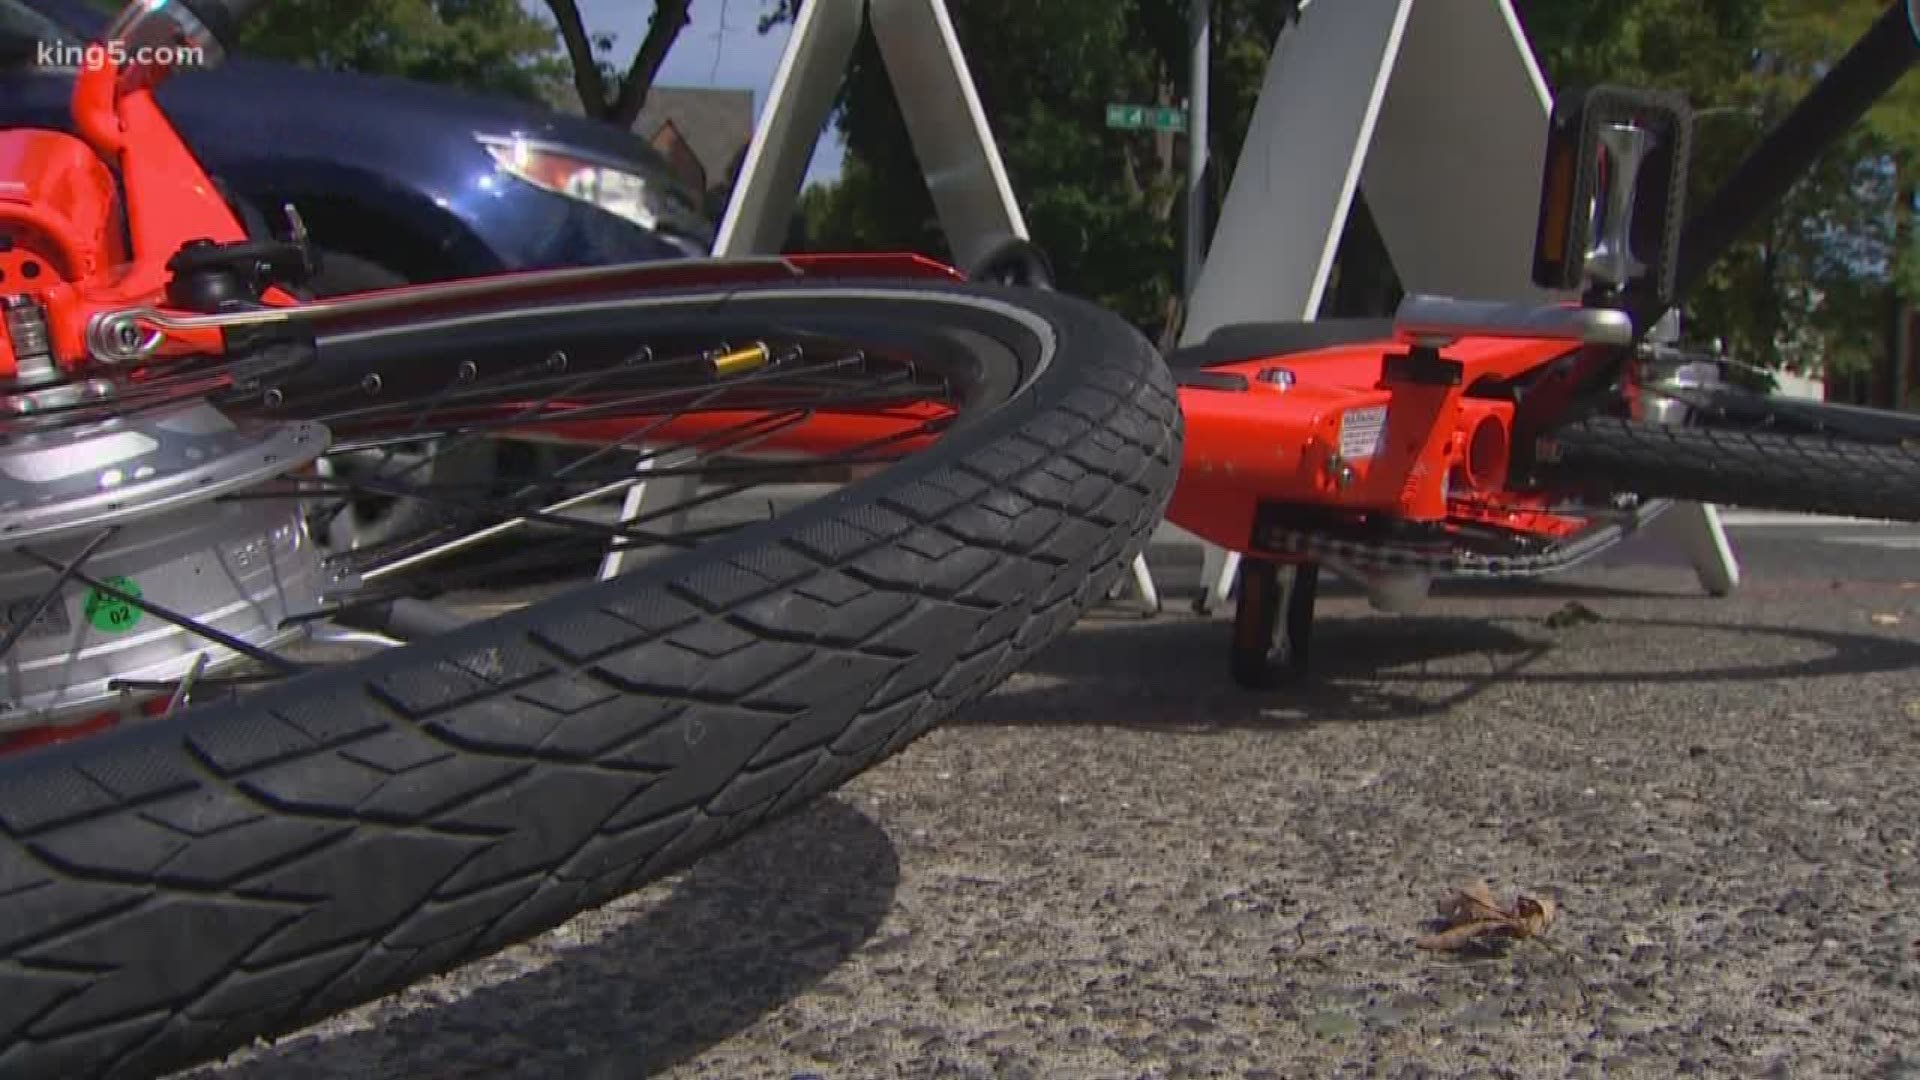 New numbers from the Seattle Department of Transportation show the city needs to address the problem of improperly parked bikes. Bikeshare bicycles have created obstacles on city sidewalks and SDOT said some of the parking jobs violated the Americans With Disabilities Act. KING 5's Kalie Greenberg reports.